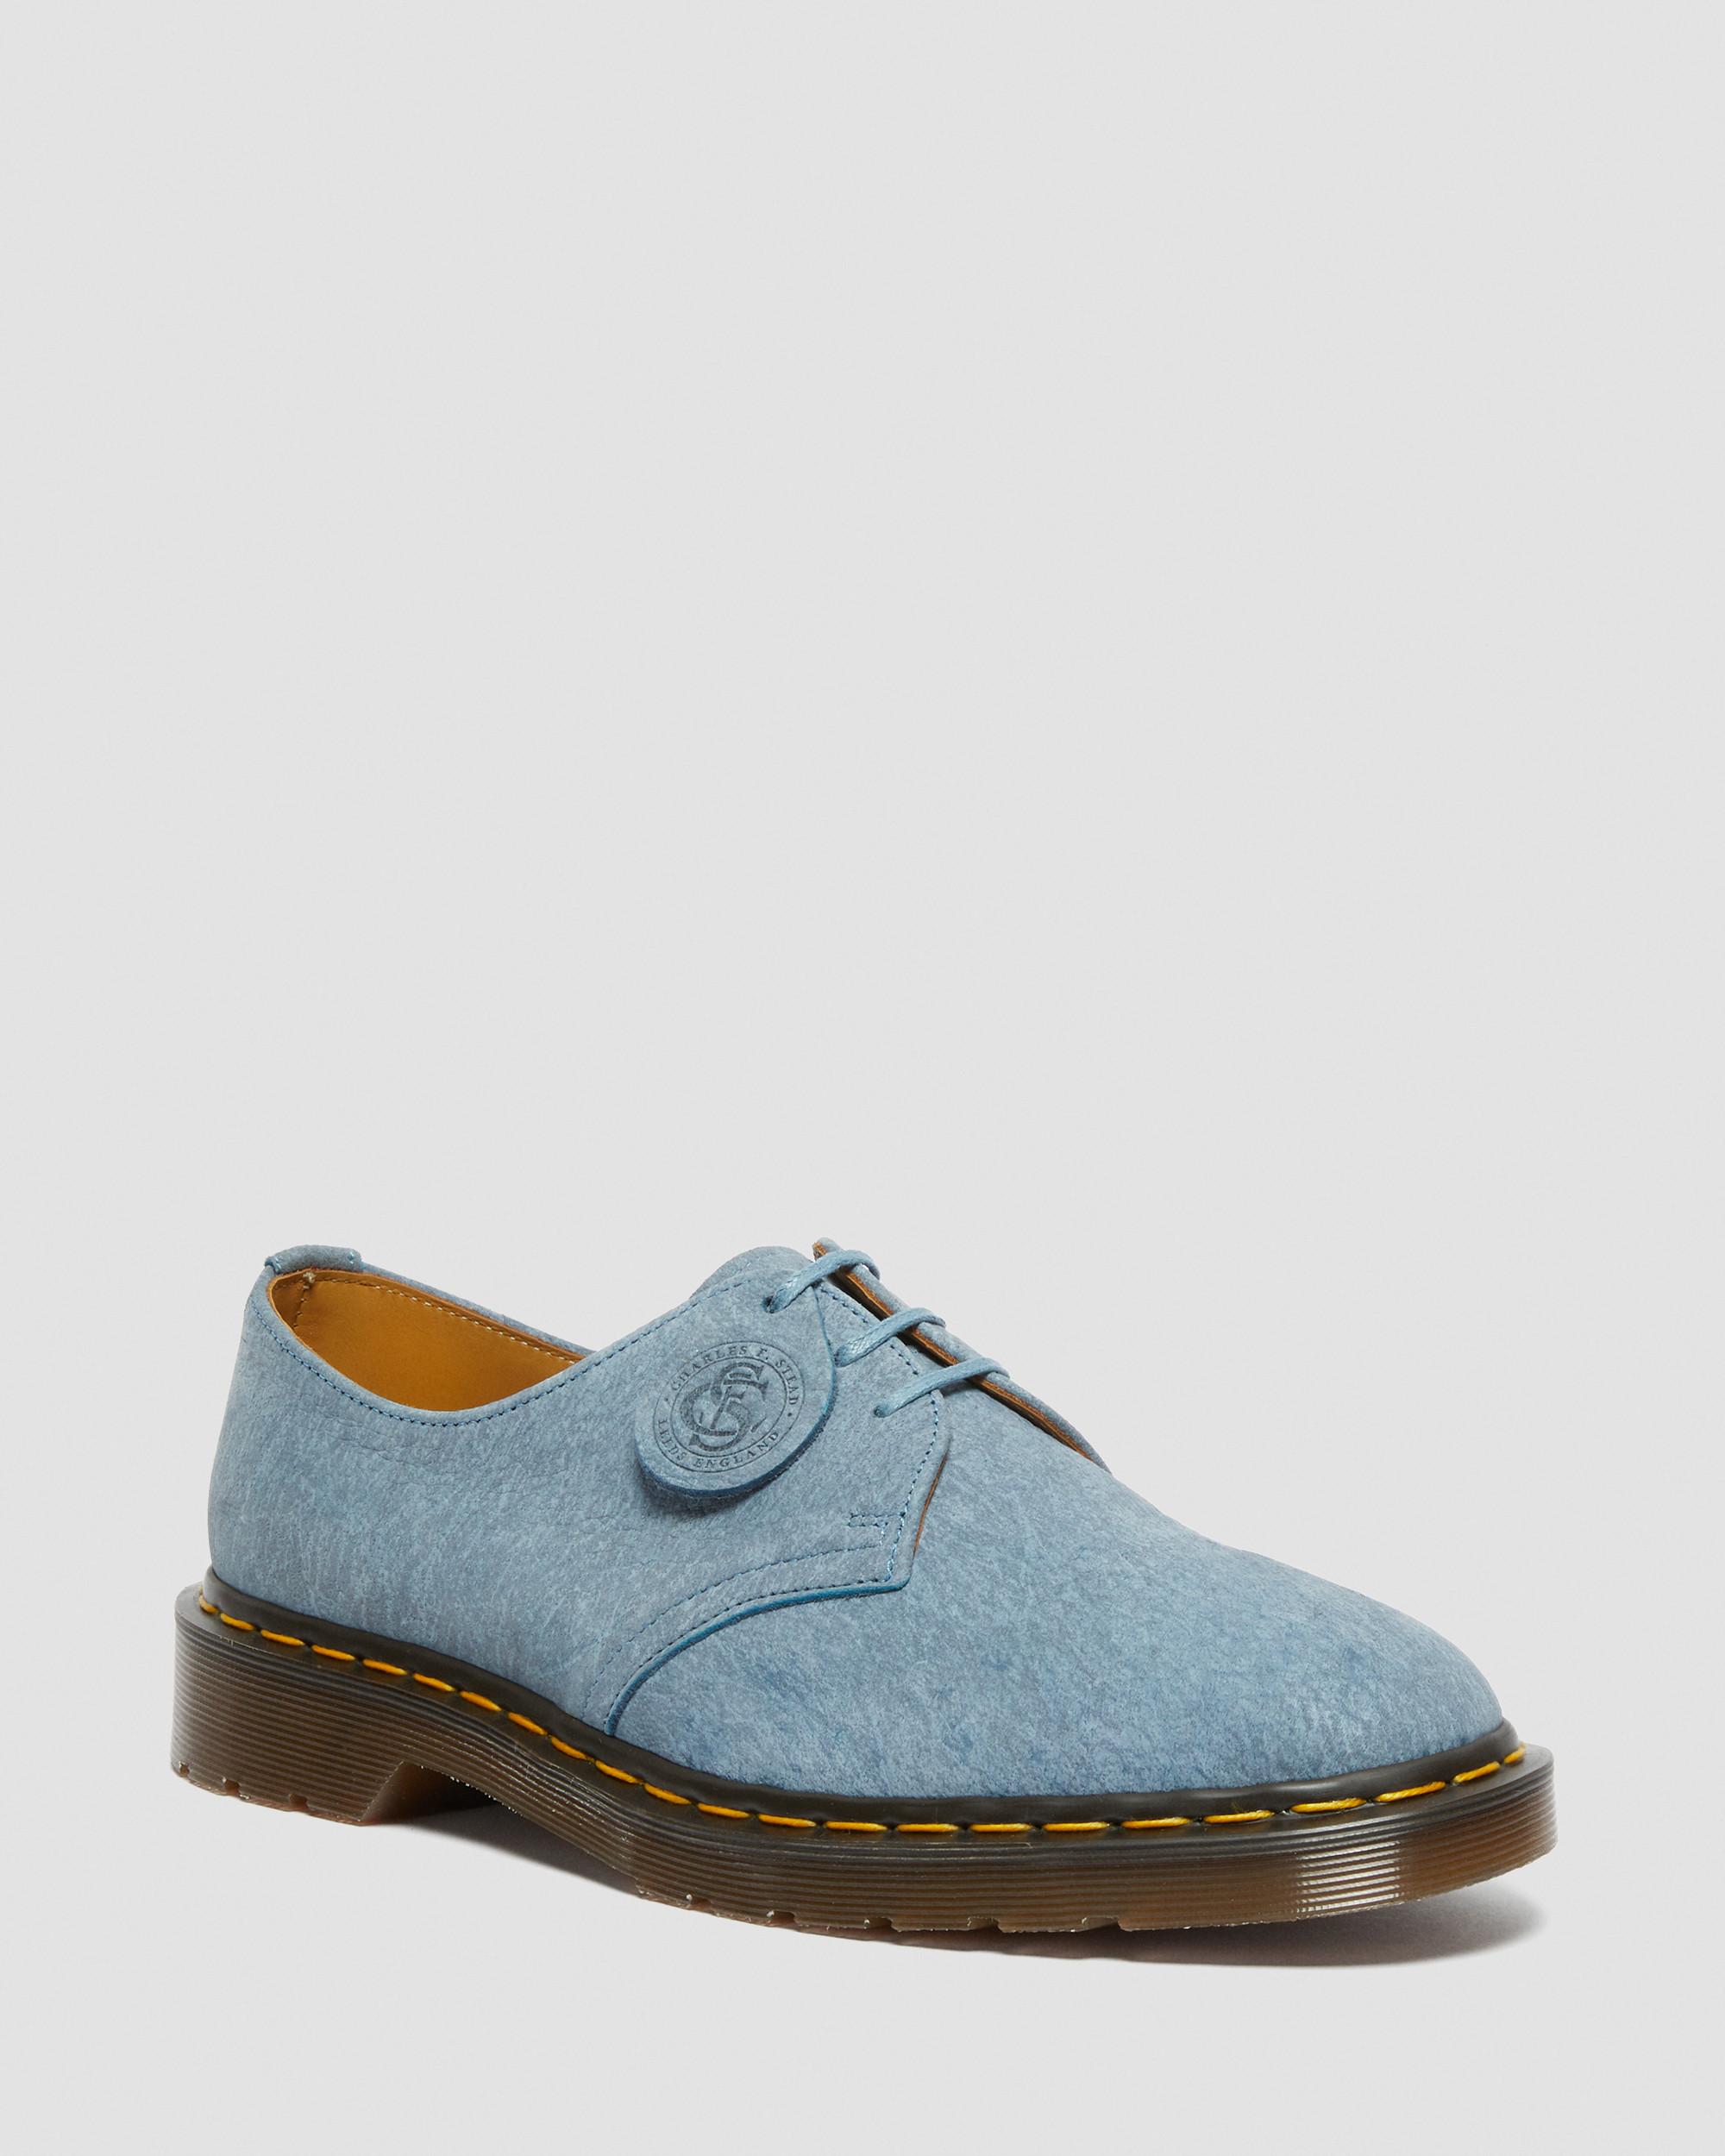 1461 Made In England Nubuck Leather Oxford Shoes | Dr. Martens